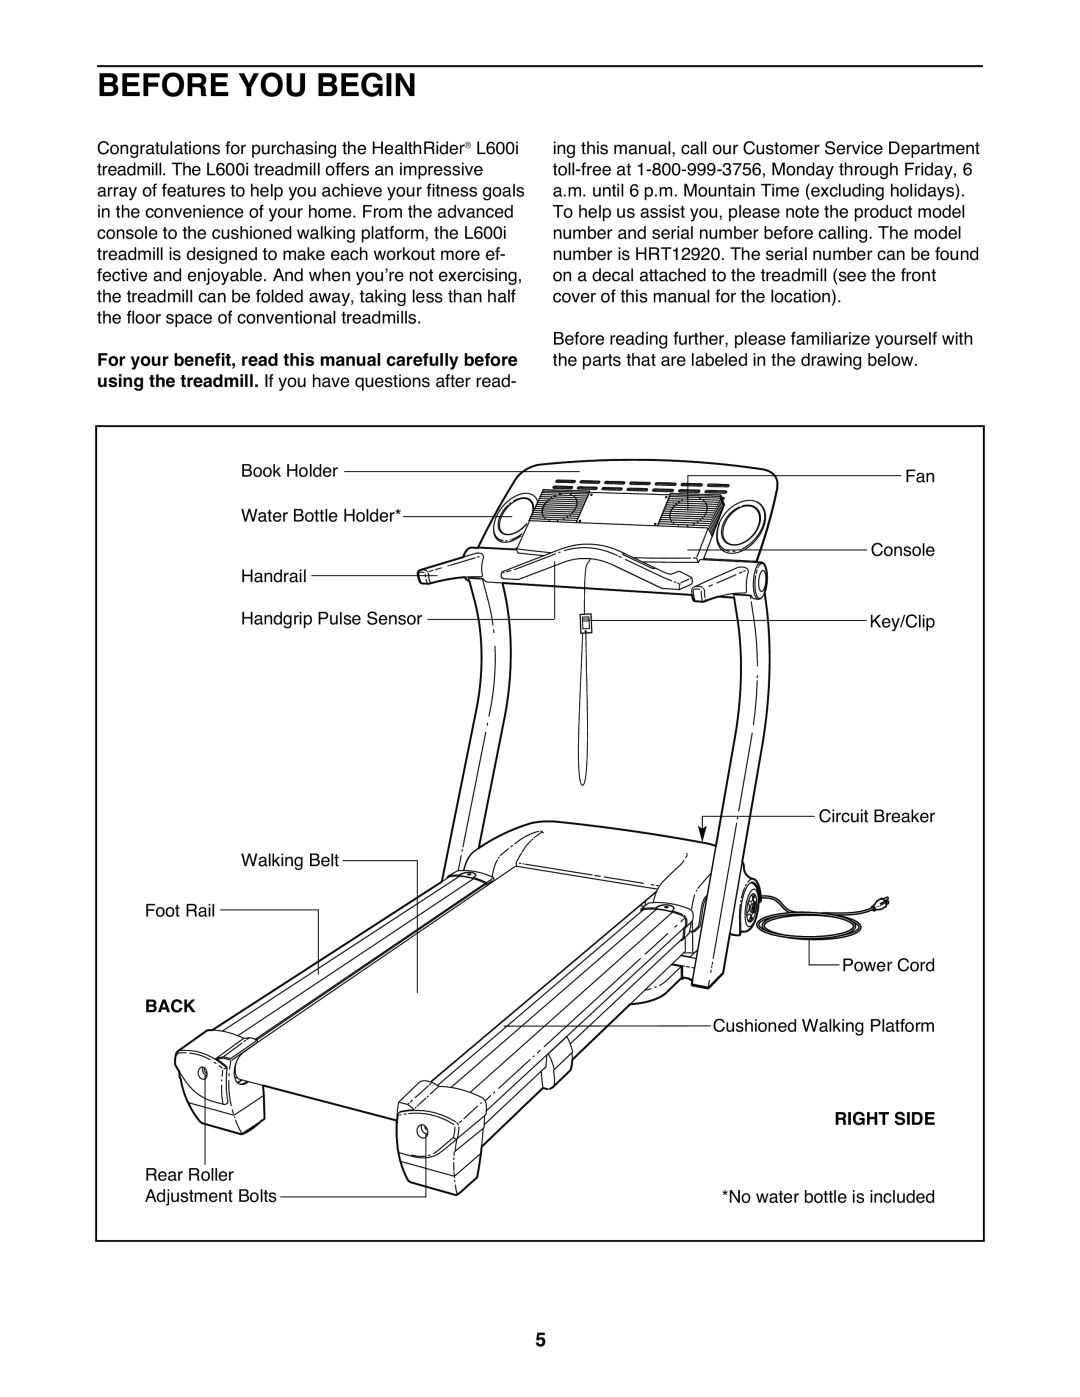 Healthrider HRT12920 manual Before You Begin, Back, Right Side 